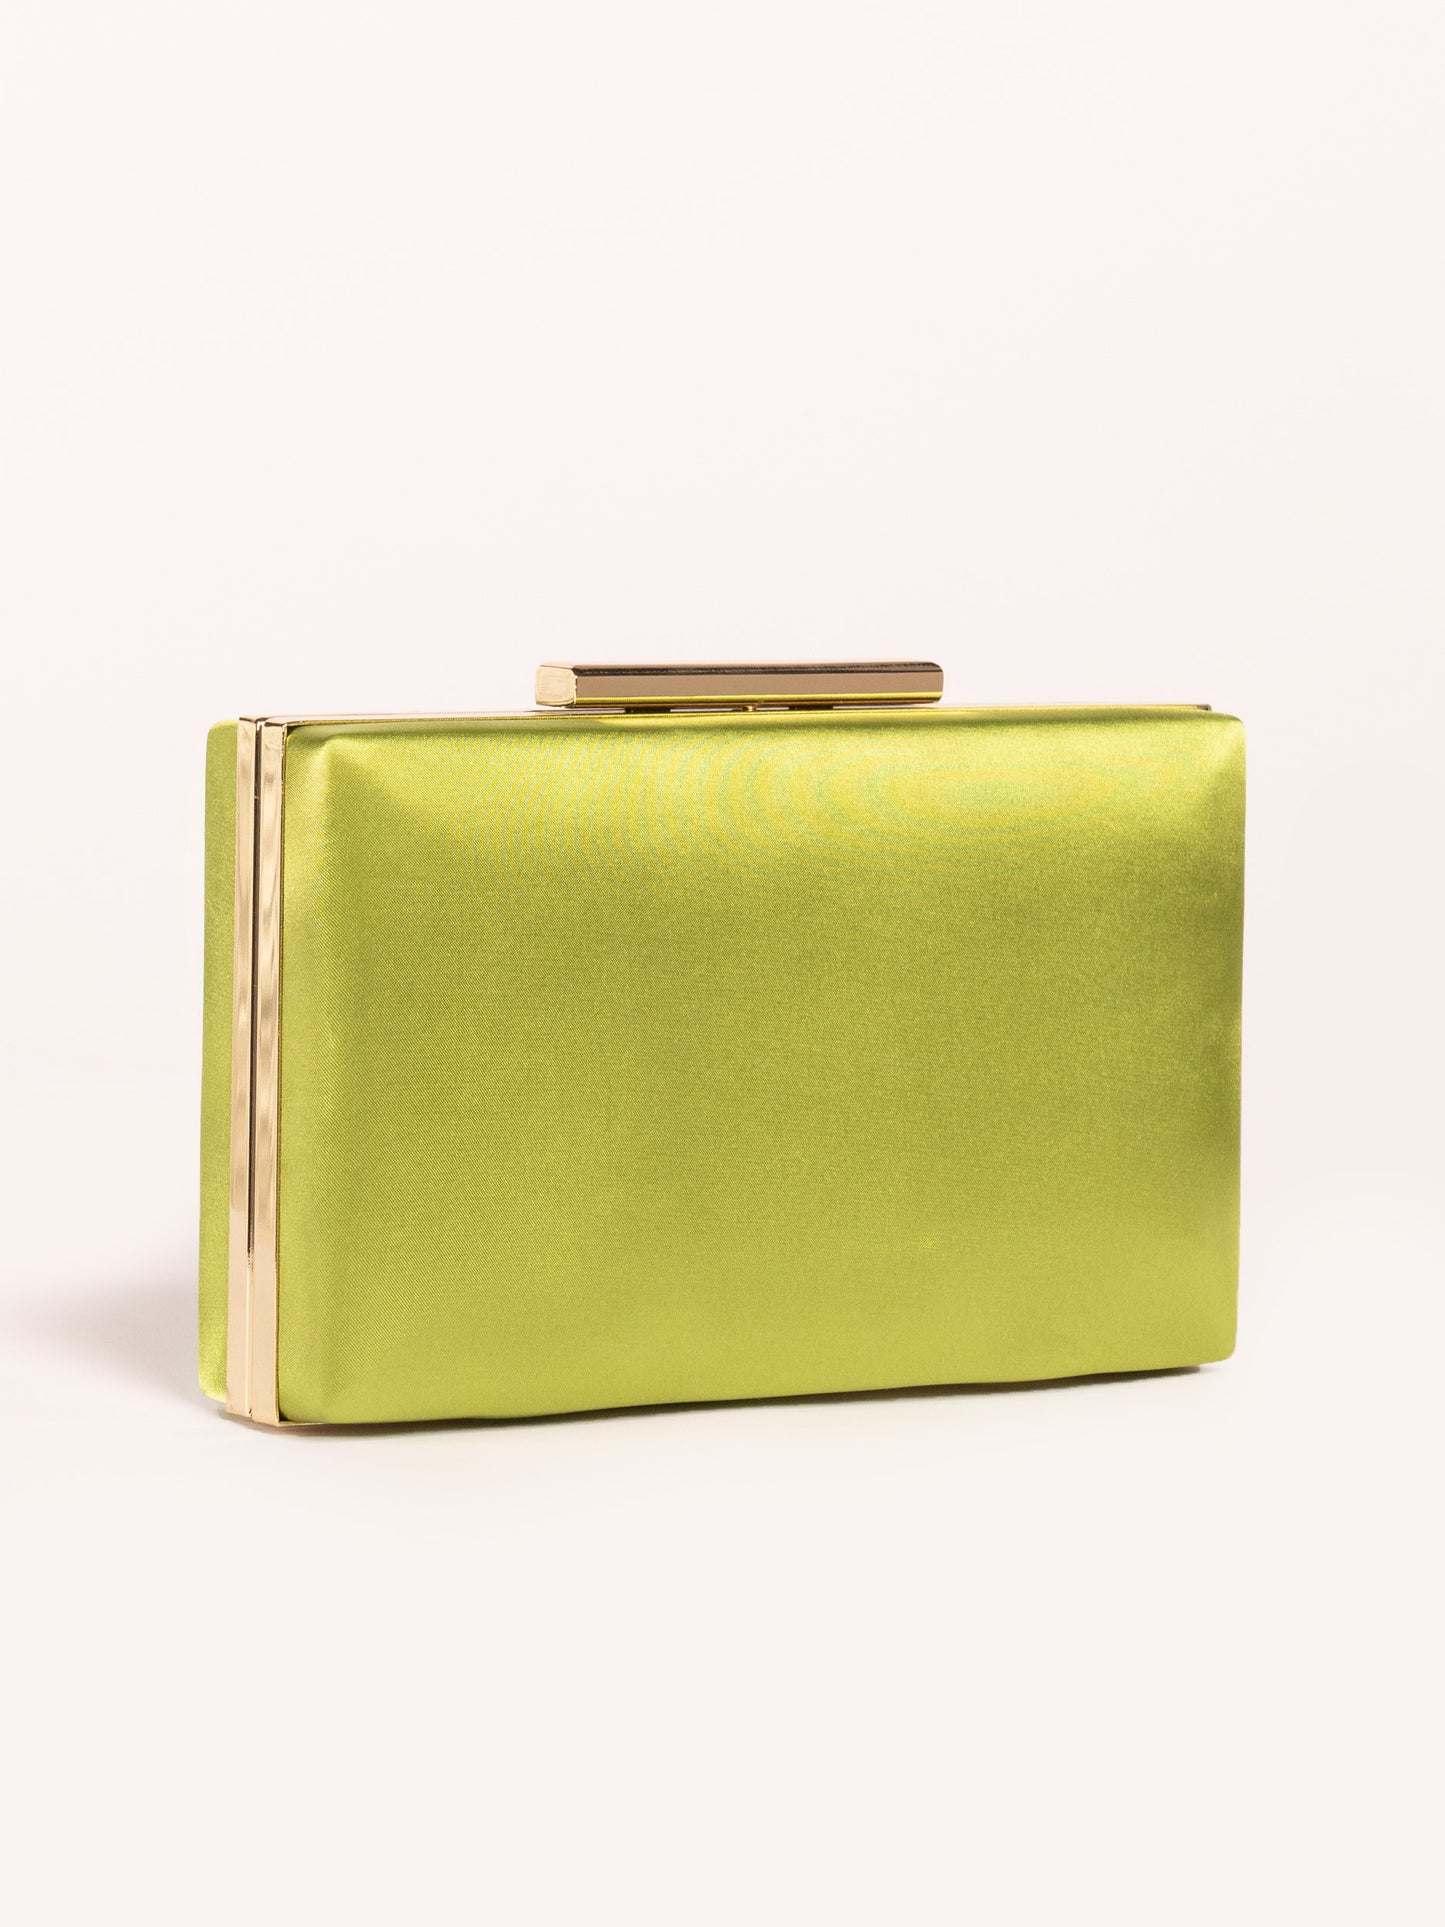 Satin Boxed Clutch